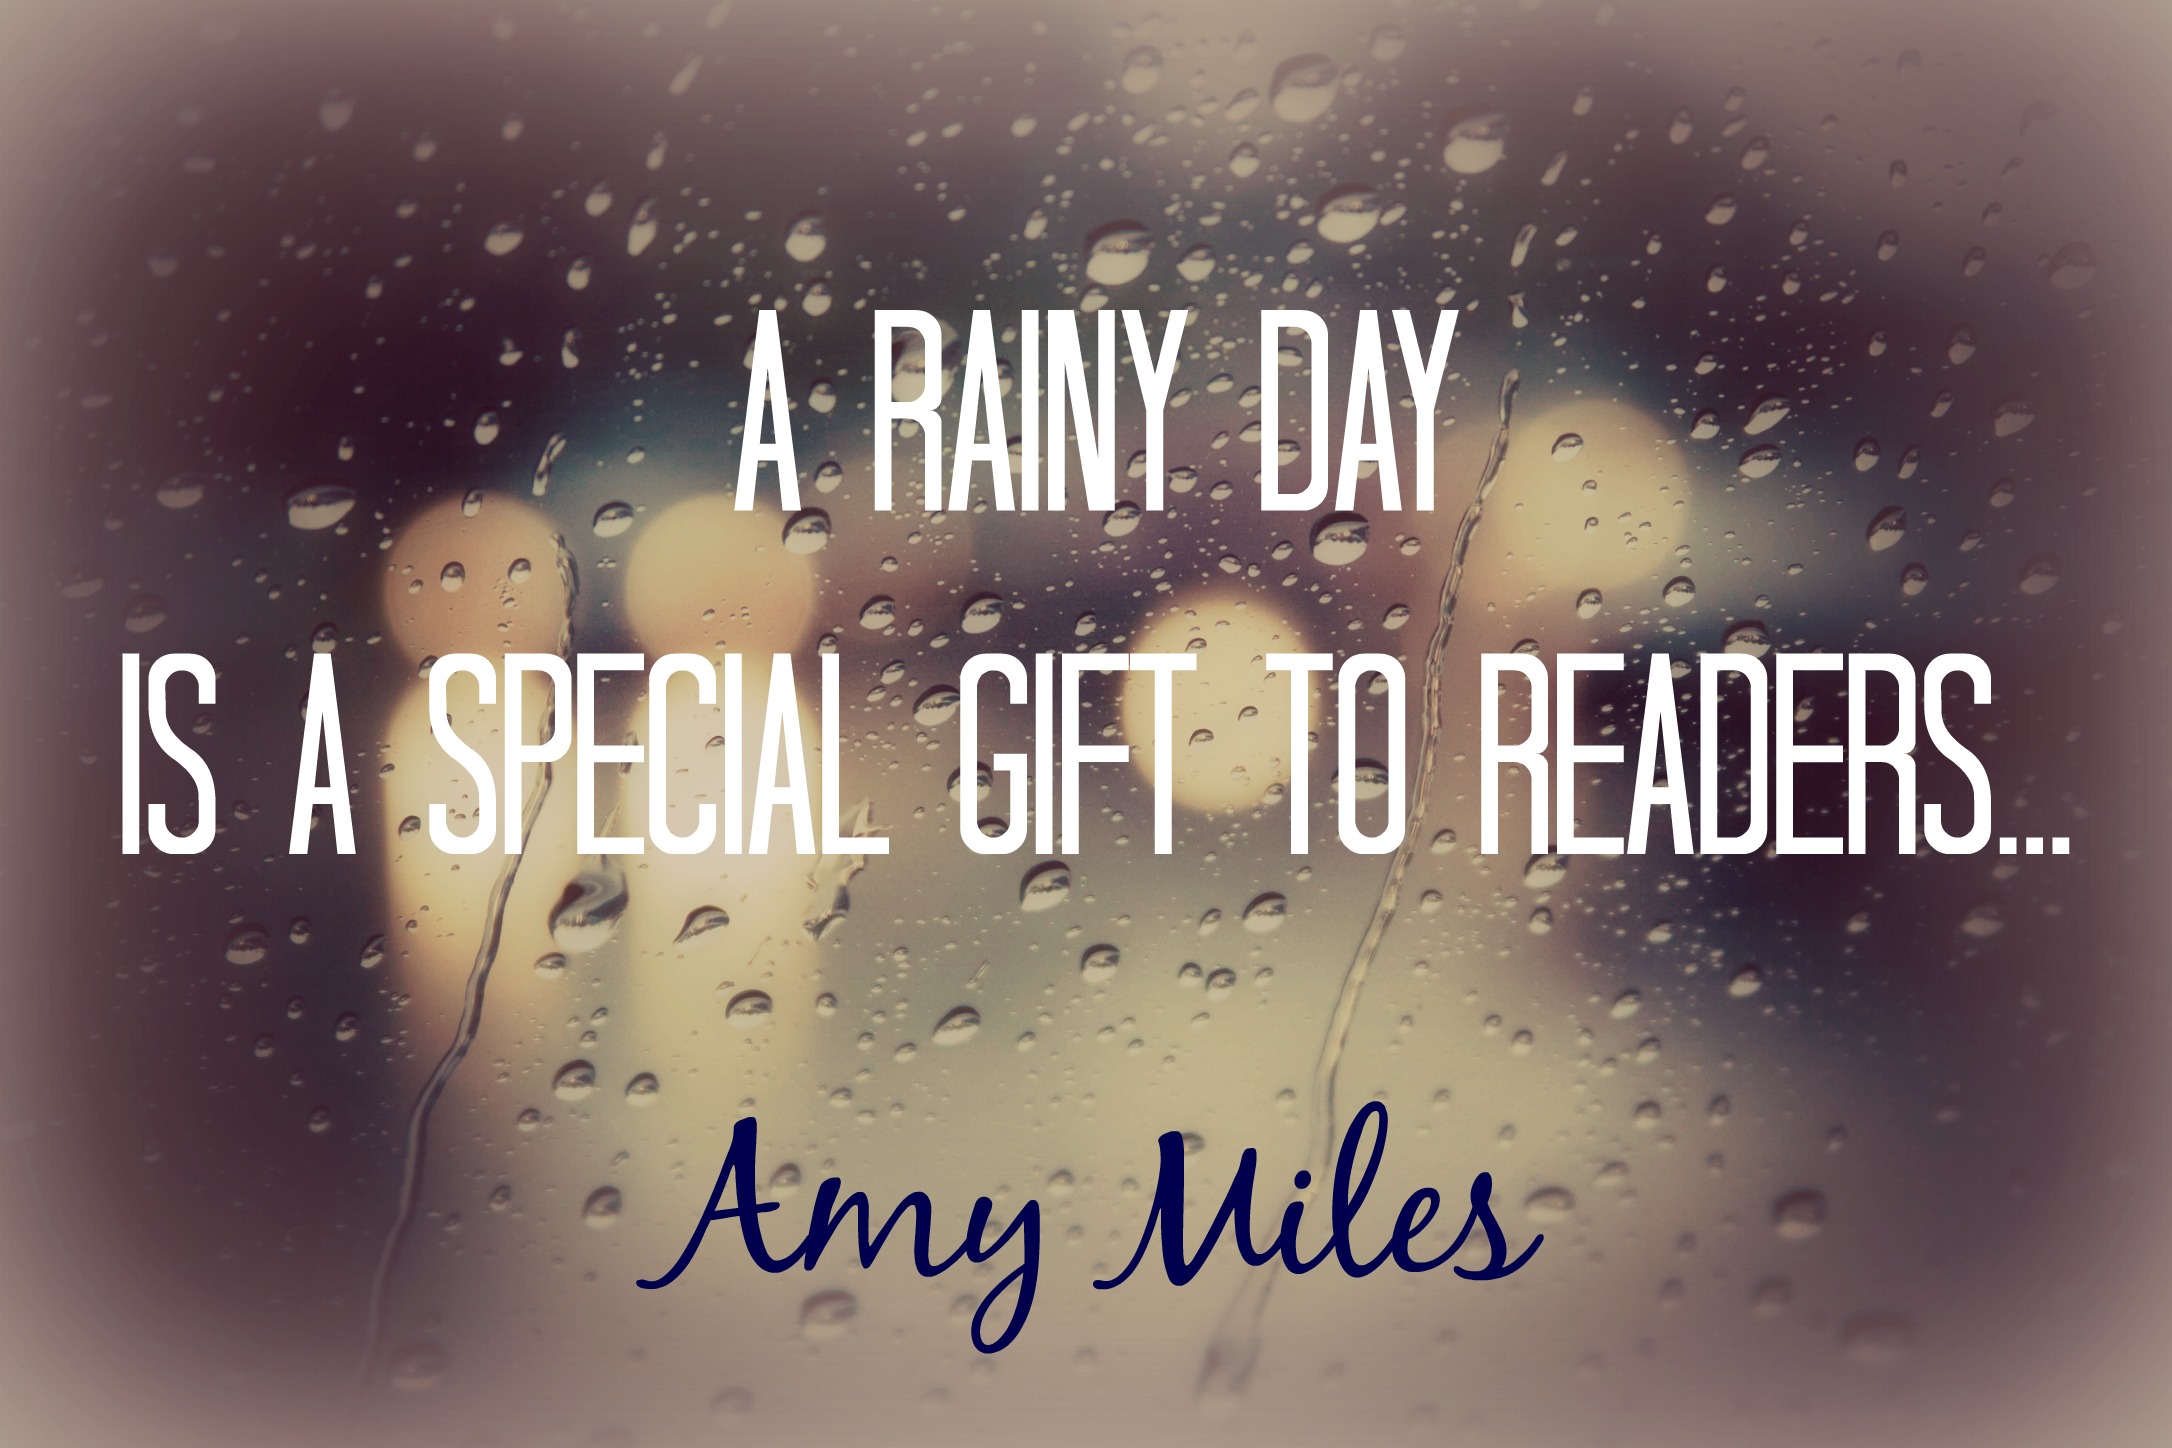 happy rainy day wallpapers for facebook